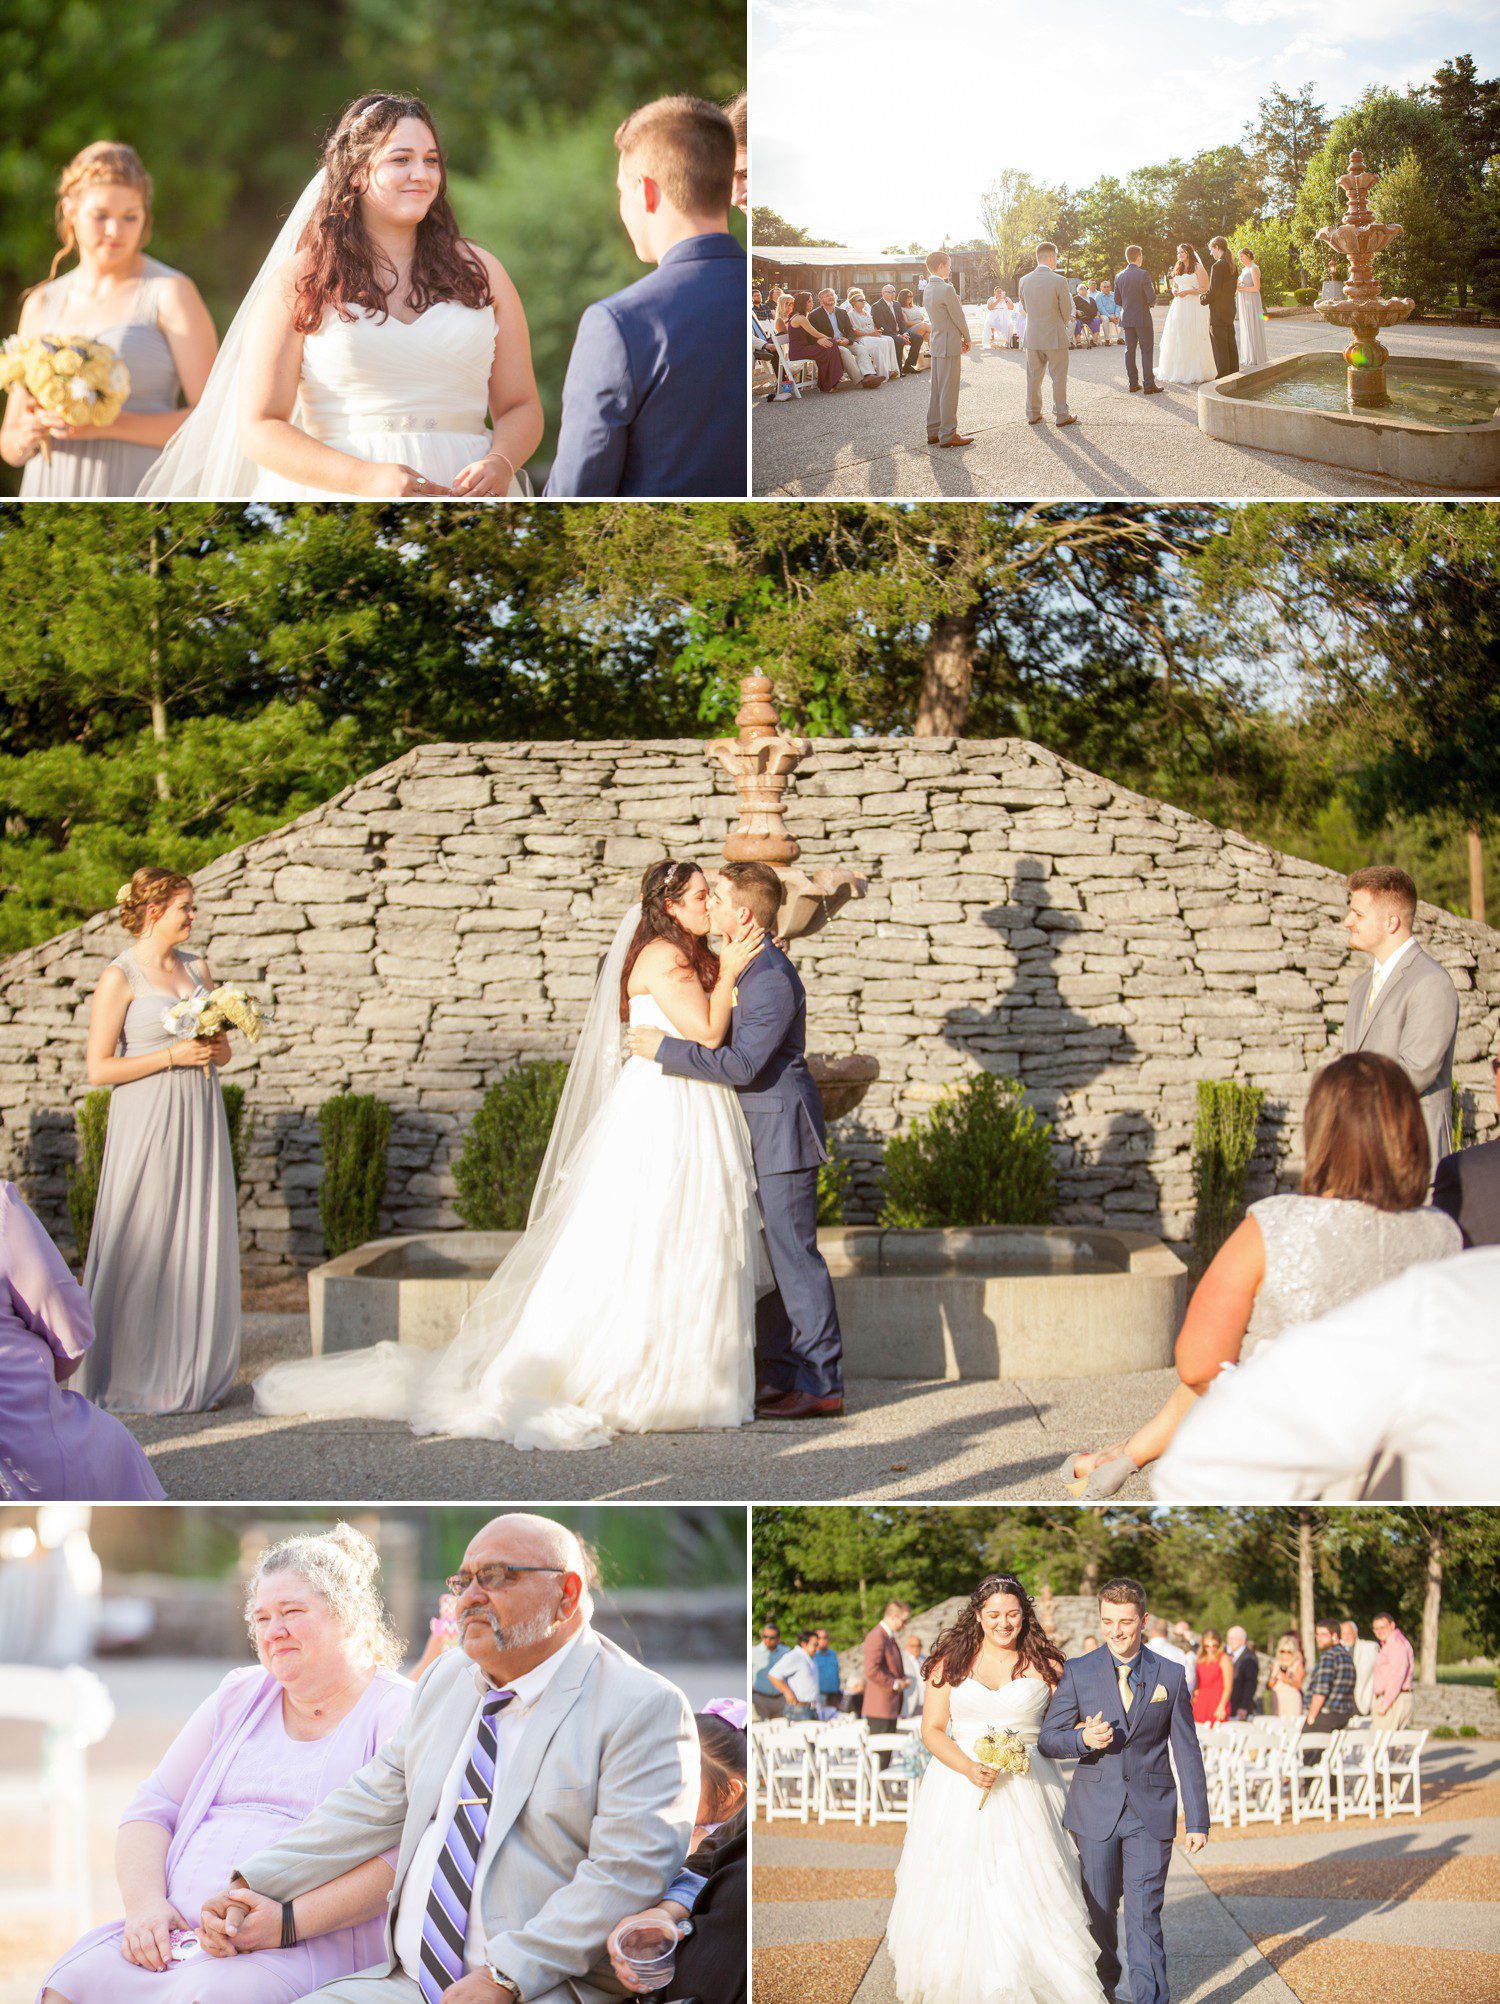 Wedding ceremony at Legacy Farms in Lebanon, TN, photos by Krista Lee Photography 